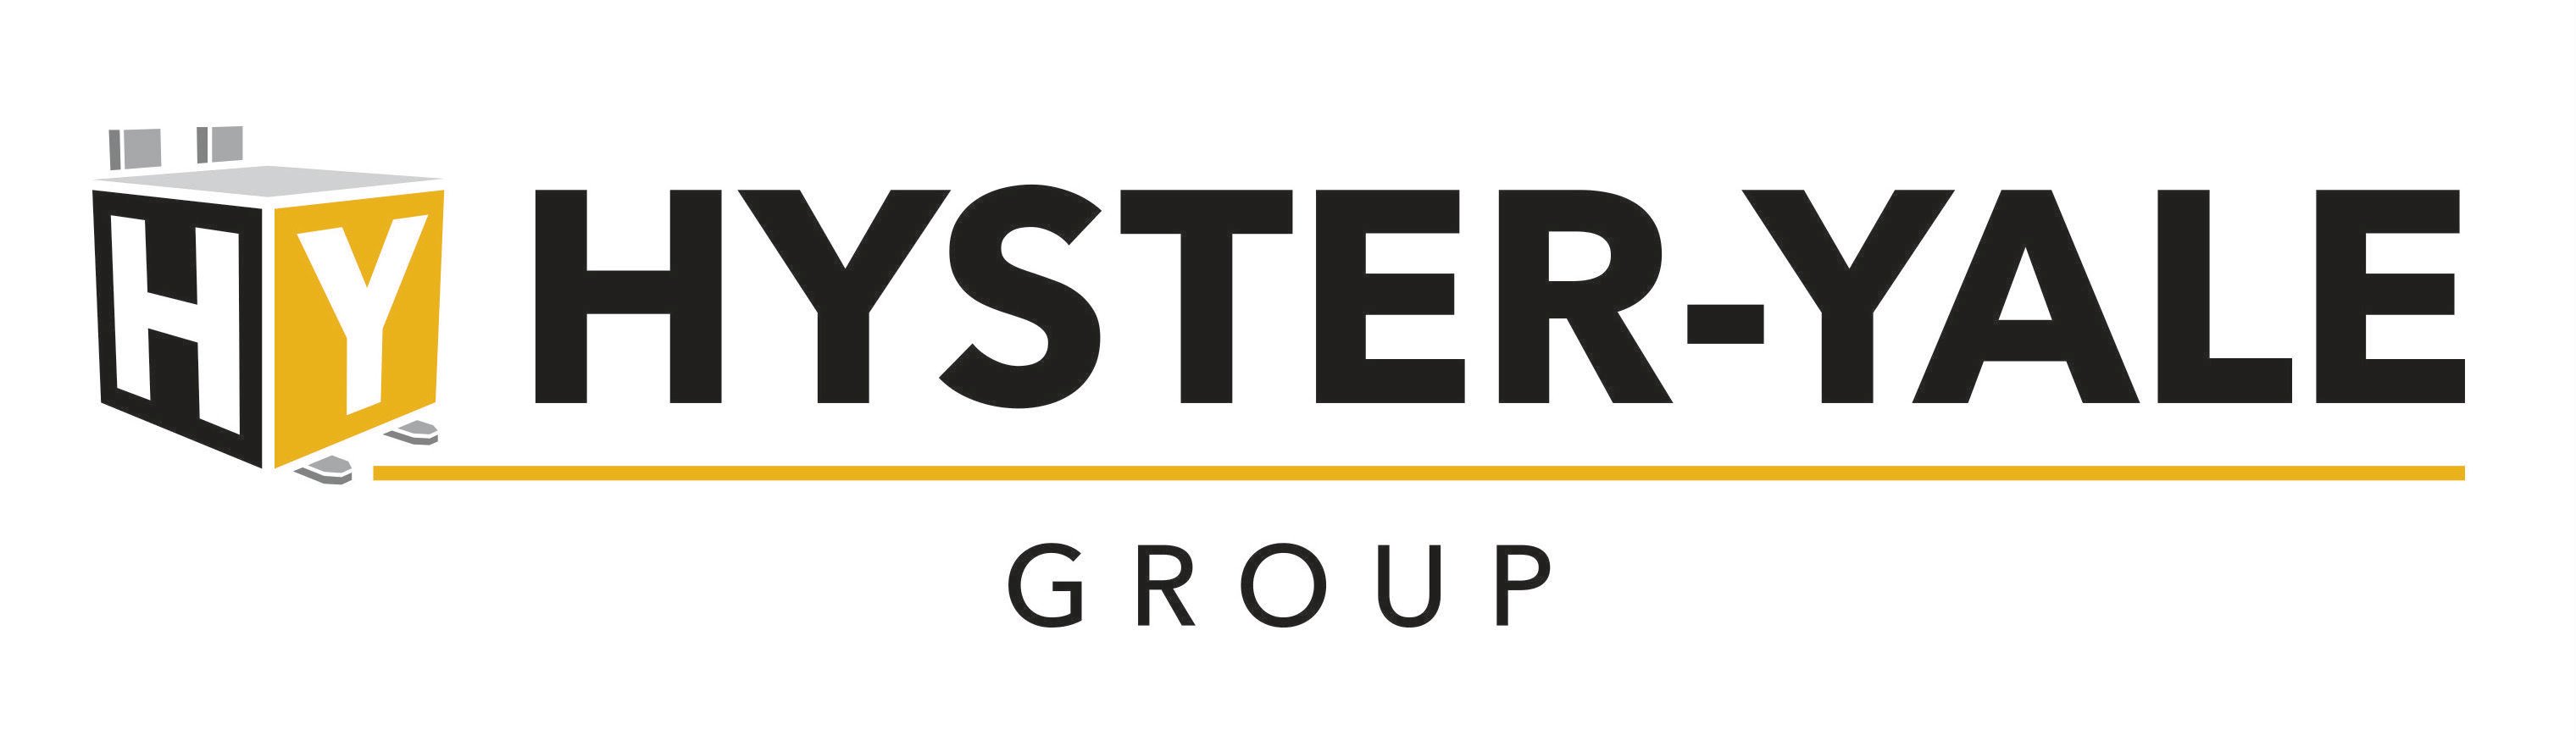 Hyster Logo - Hyster Yale Materials Handling, Inc. Announces New Operating